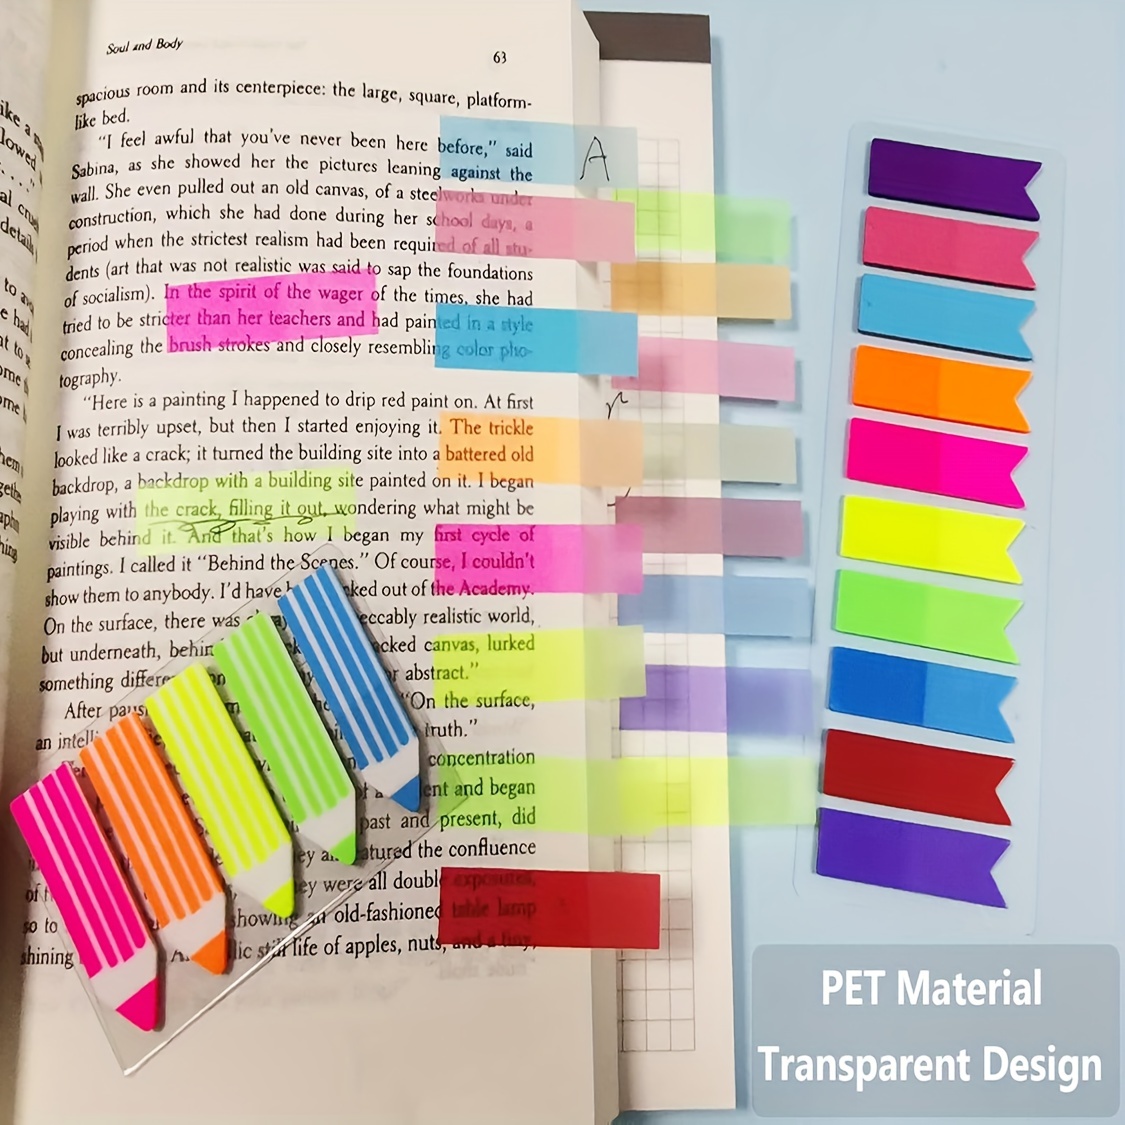 ELII 1200pcs Sticky Tabs Book tabs Sticky Index Tabs Arrow Flags,Morandi  Page Markers Transparent Sticky Notes Colored Annotation Tabs Writable